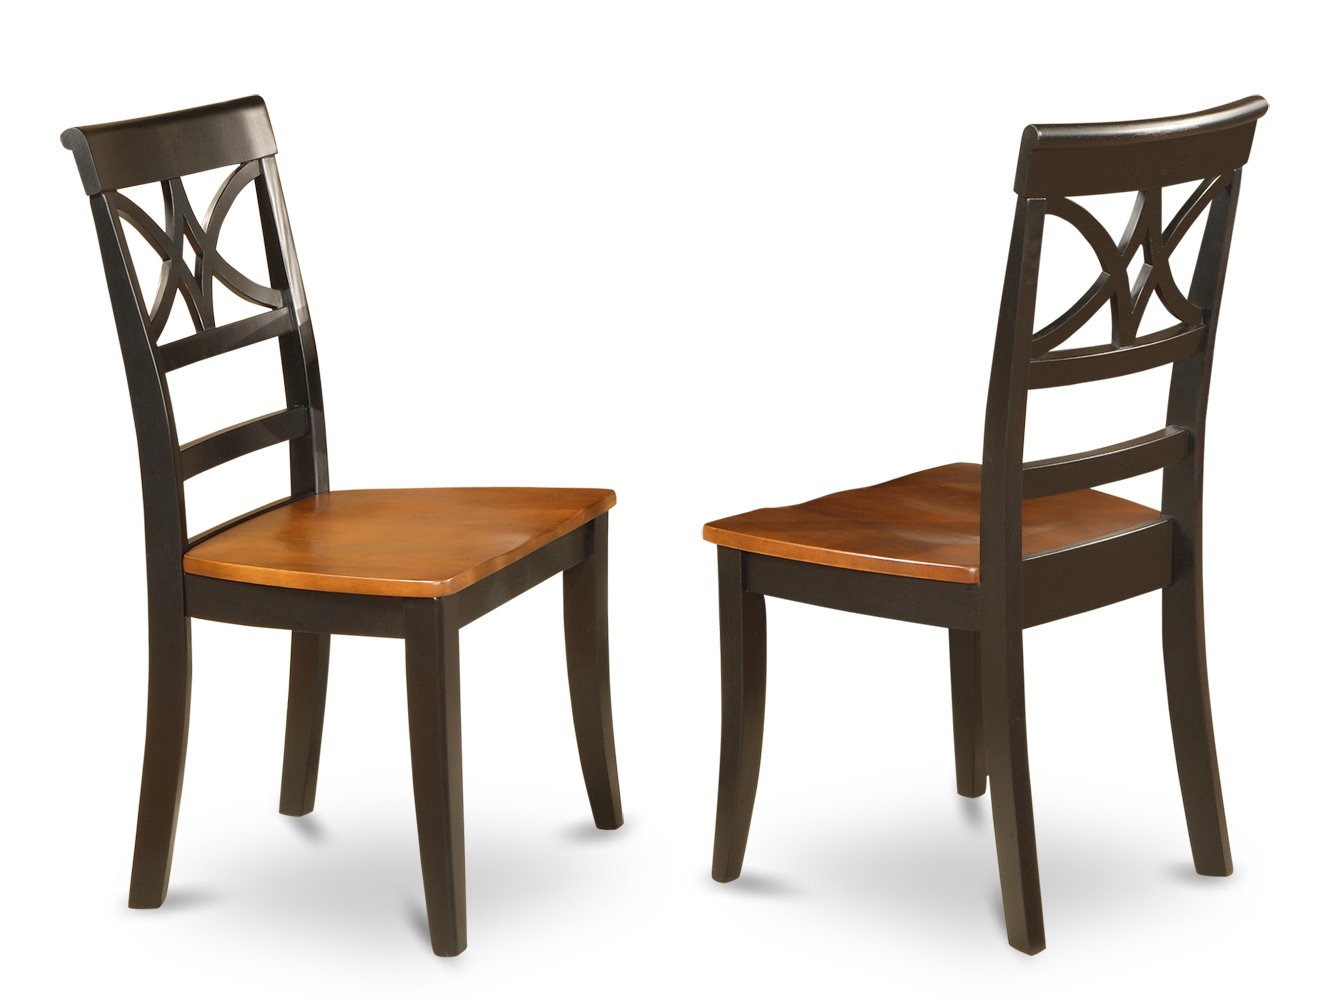 Set of 4 Ellington dining room chairs with upholstered or wood seat in